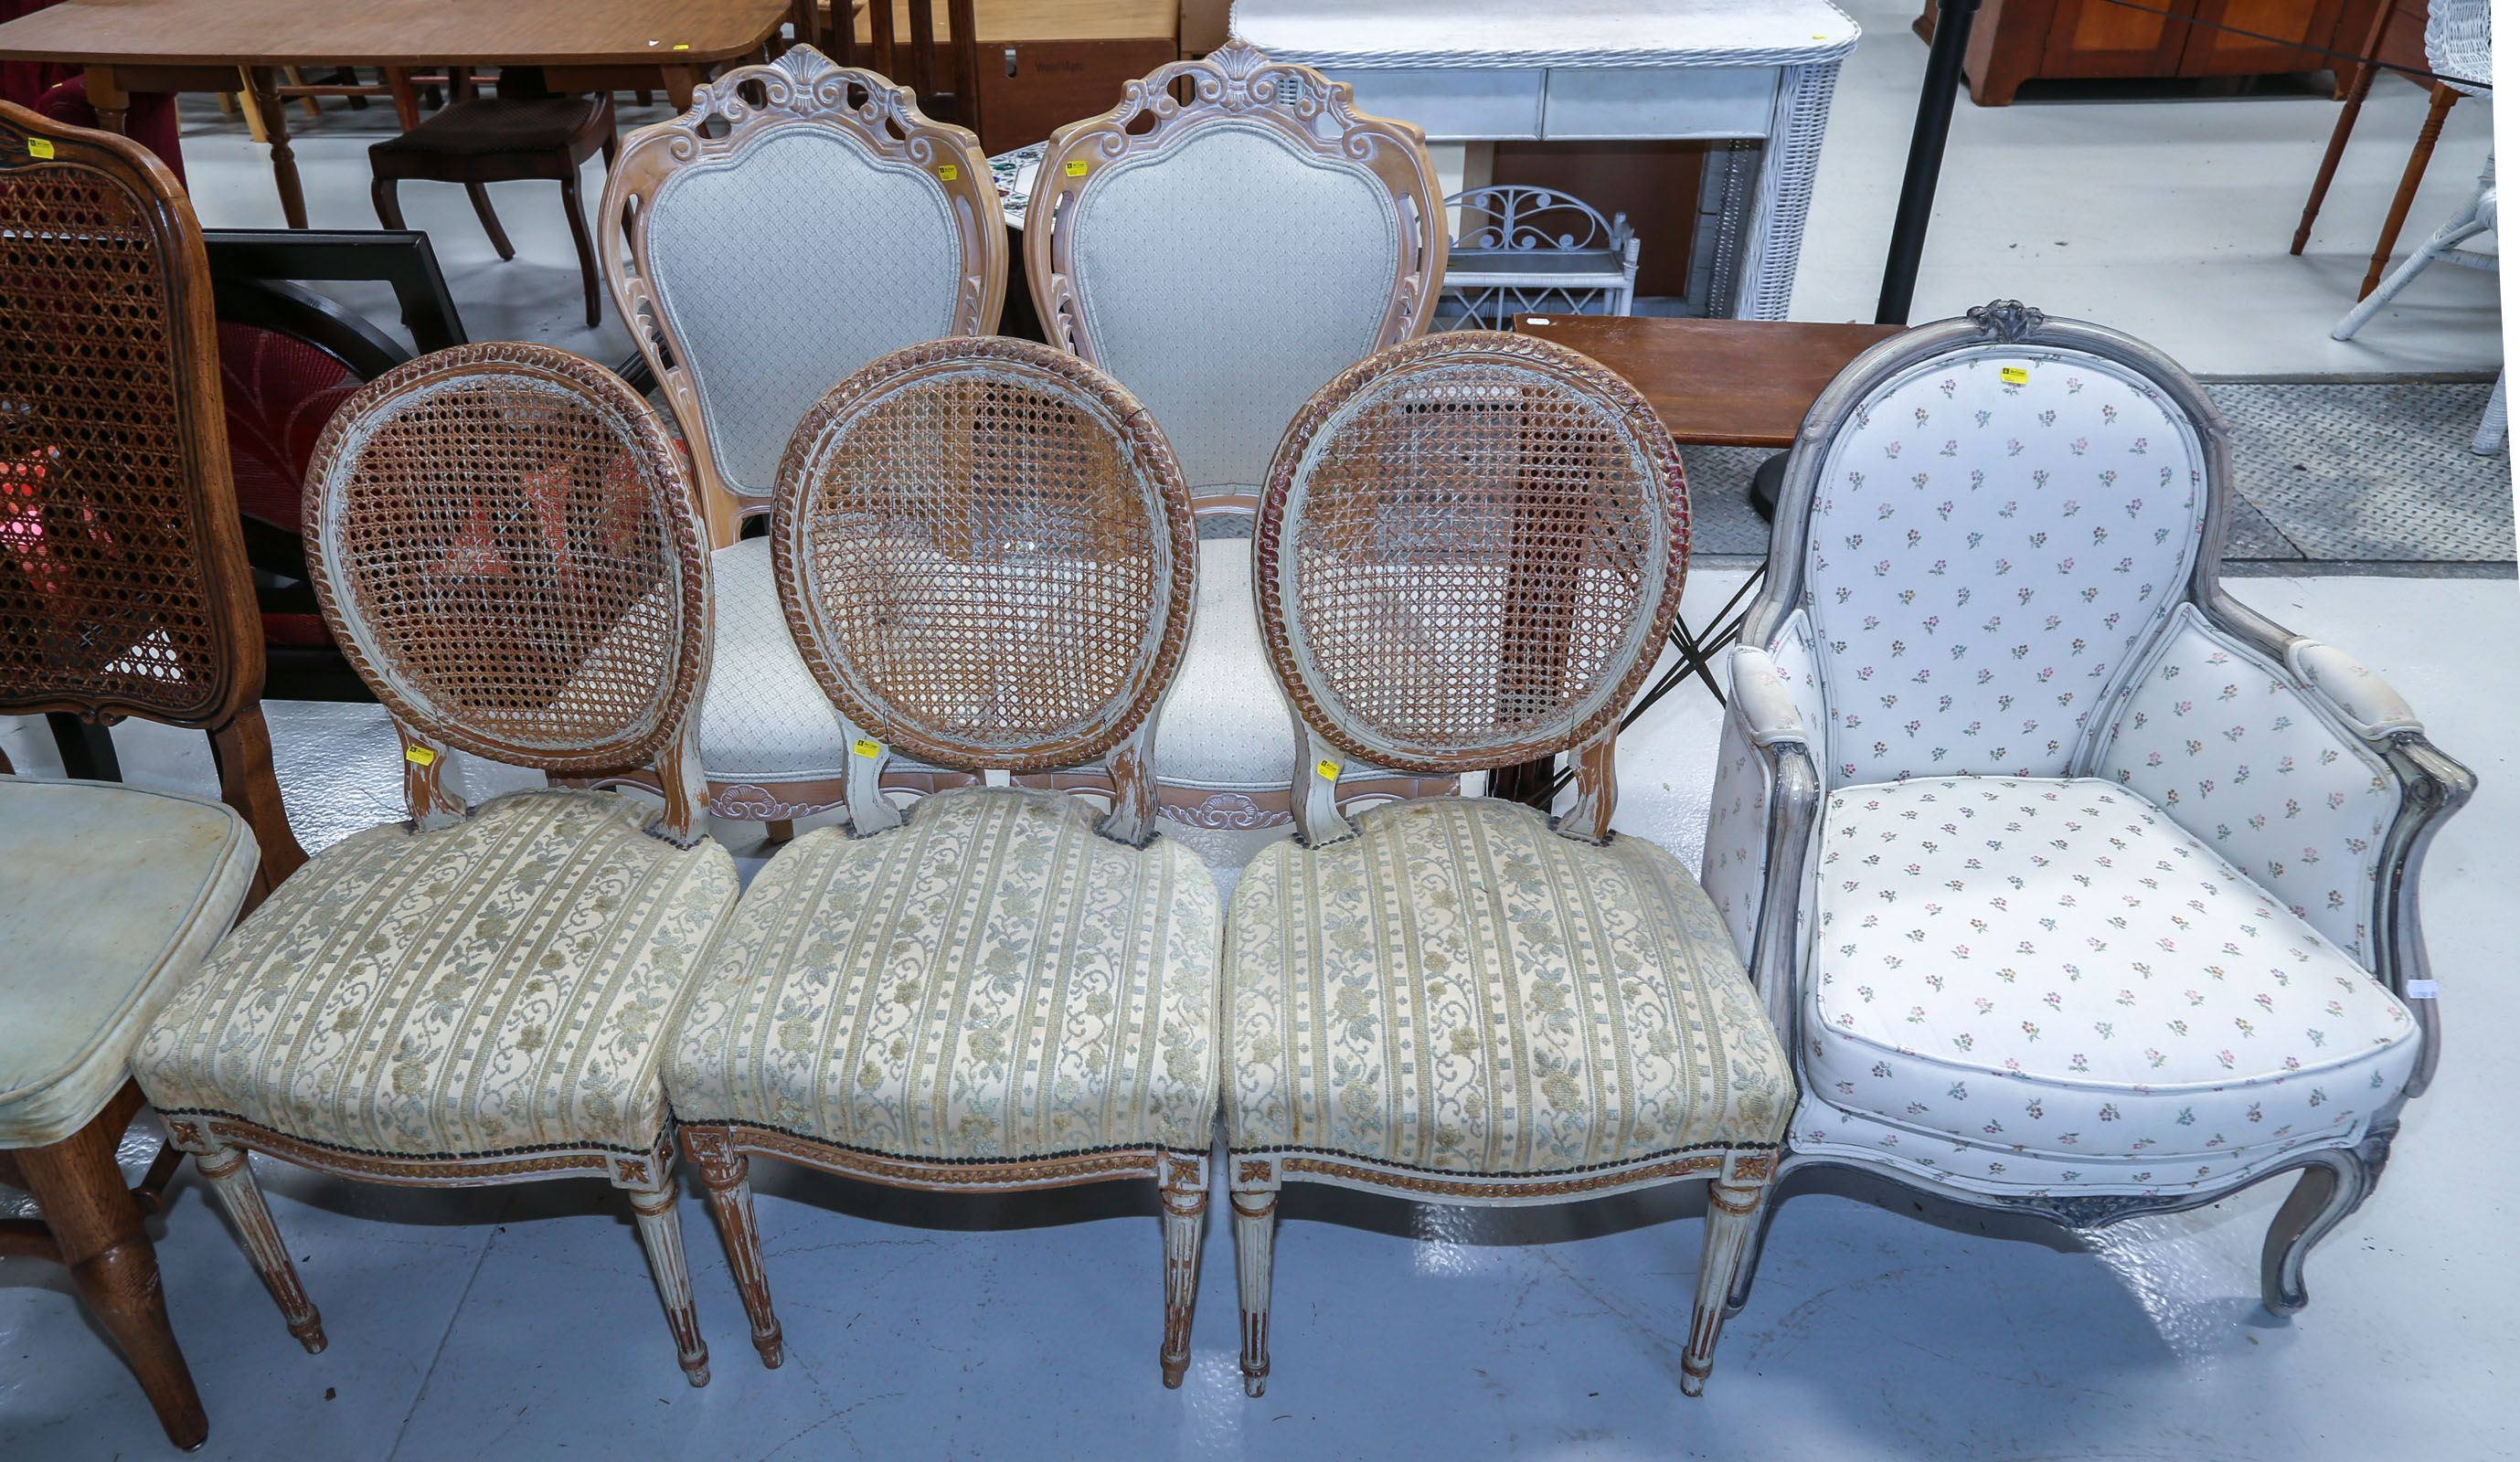 SIX CHAIRS A SET OF NESTING TABLES 2e9c06